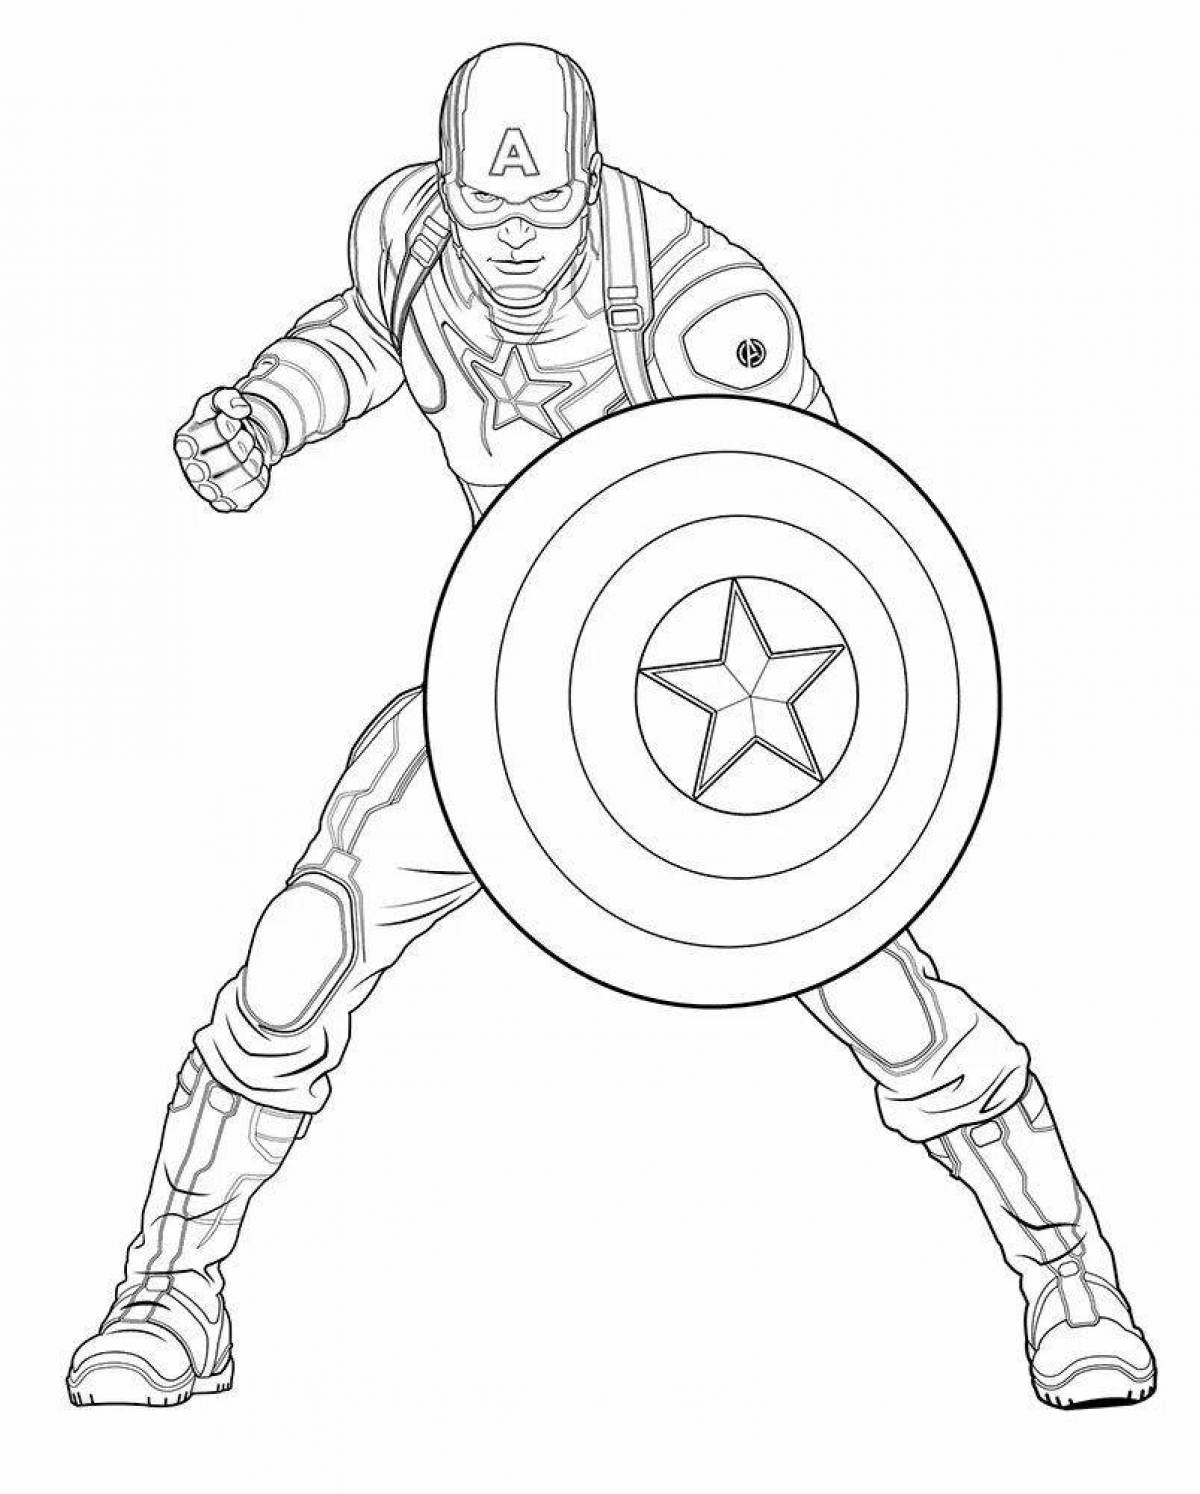 Captain marvel royal coloring page